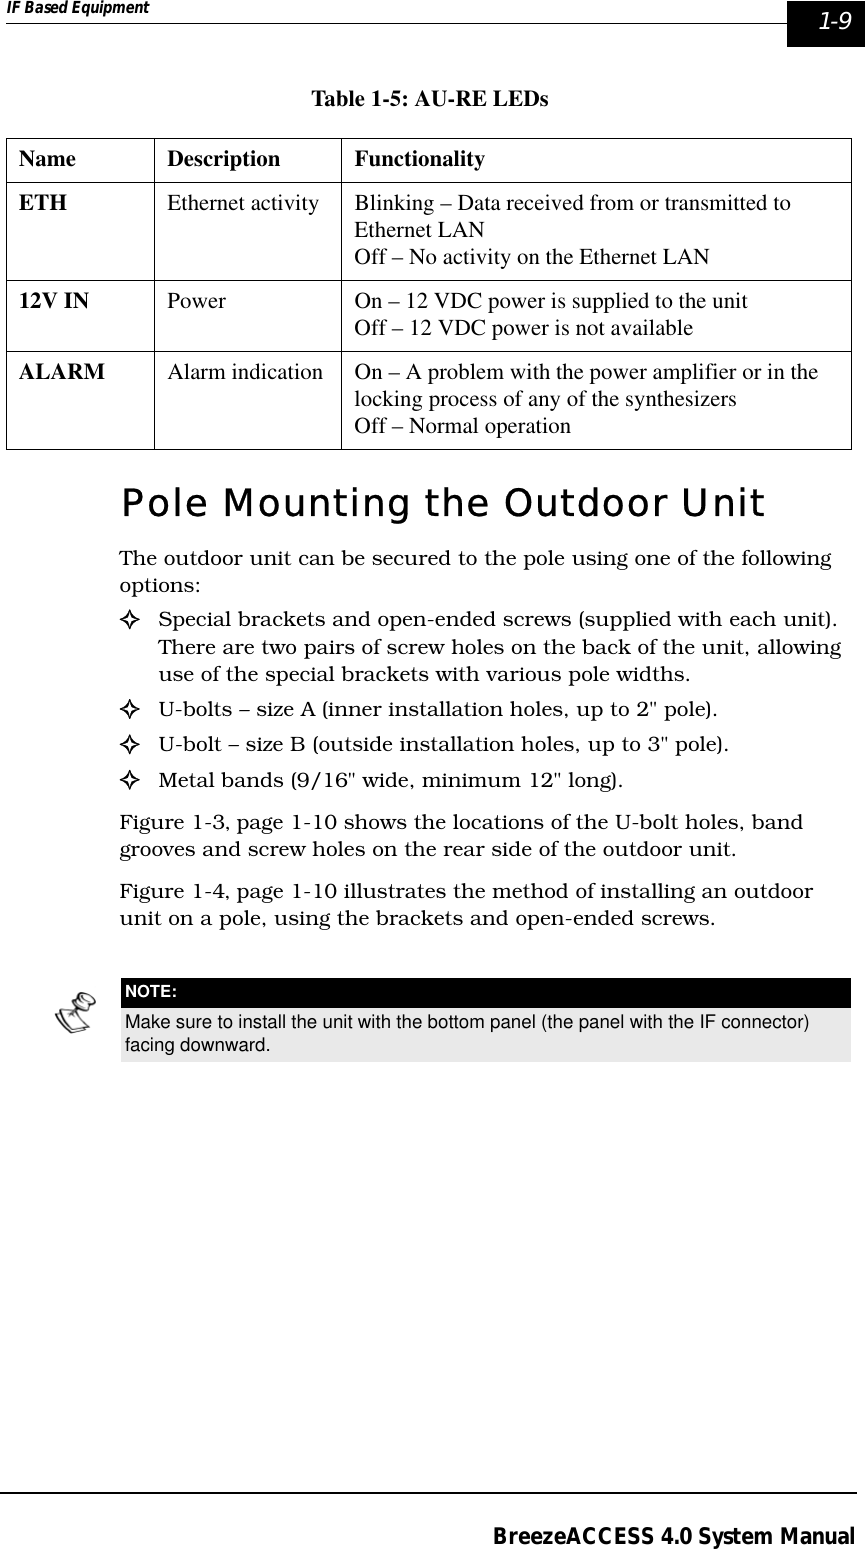 IF Based Equipment  1-9BreezeACCESS 4.0 System ManualTable 1-5: AU-RE LEDsPole Mounting the Outdoor UnitThe outdoor unit can be secured to the pole using one of the following options:!Special brackets and open-ended screws (supplied with each unit). There are two pairs of screw holes on the back of the unit, allowing use of the special brackets with various pole widths.!U-bolts – size A (inner installation holes, up to 2&quot; pole).!U-bolt – size B (outside installation holes, up to 3&quot; pole).!Metal bands (9/16&quot; wide, minimum 12&quot; long).Figure 1-3‚ page 1-10 shows the locations of the U-bolt holes, band grooves and screw holes on the rear side of the outdoor unit.Figure 1-4‚ page 1-10 illustrates the method of installing an outdoor unit on a pole, using the brackets and open-ended screws.Name Description FunctionalityETH Ethernet activity Blinking – Data received from or transmitted to Ethernet LANOff – No activity on the Ethernet LAN12V IN Power On – 12 VDC power is supplied to the unitOff – 12 VDC power is not availableALARM Alarm indication On – A problem with the power amplifier or in the locking process of any of the synthesizersOff – Normal operationNOTE:Make sure to install the unit with the bottom panel (the panel with the IF connector) facing downward.